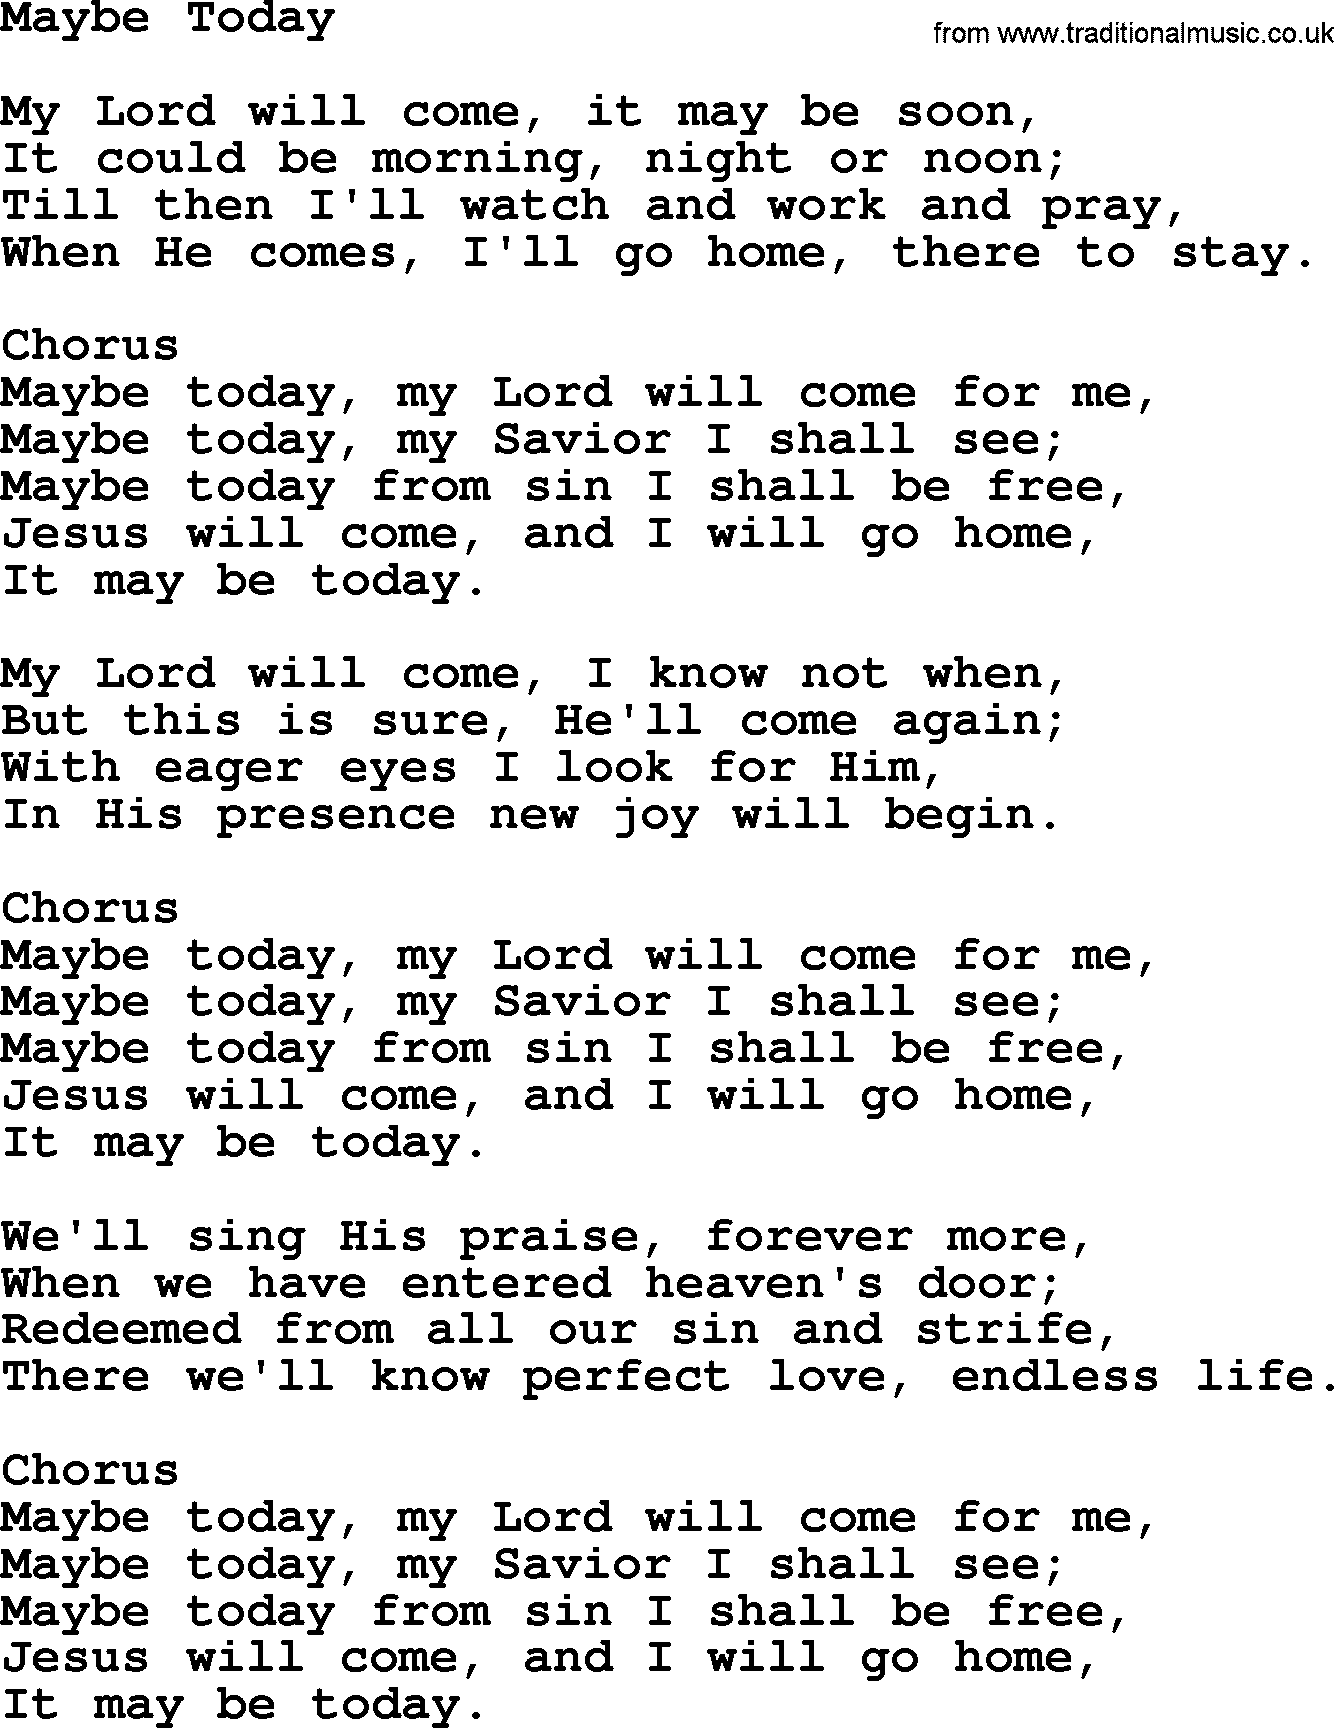 baptist-hymnal-christian-song-maybe-today-lyrics-with-pdf-for-printing